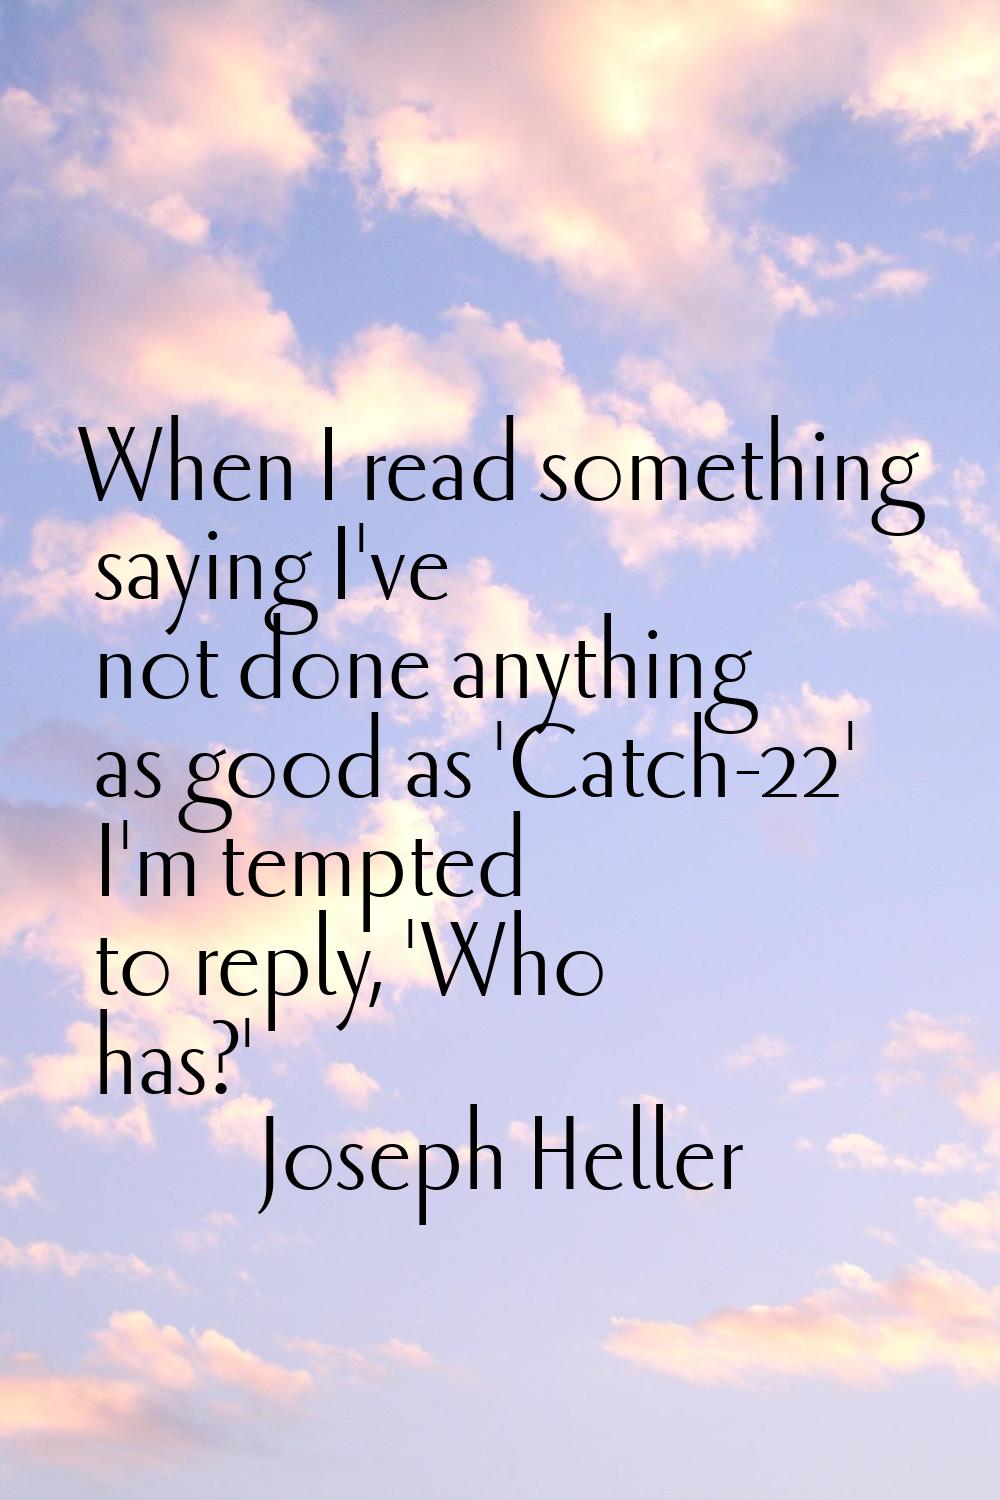 When I read something saying I've not done anything as good as 'Catch-22' I'm tempted to reply, 'Wh